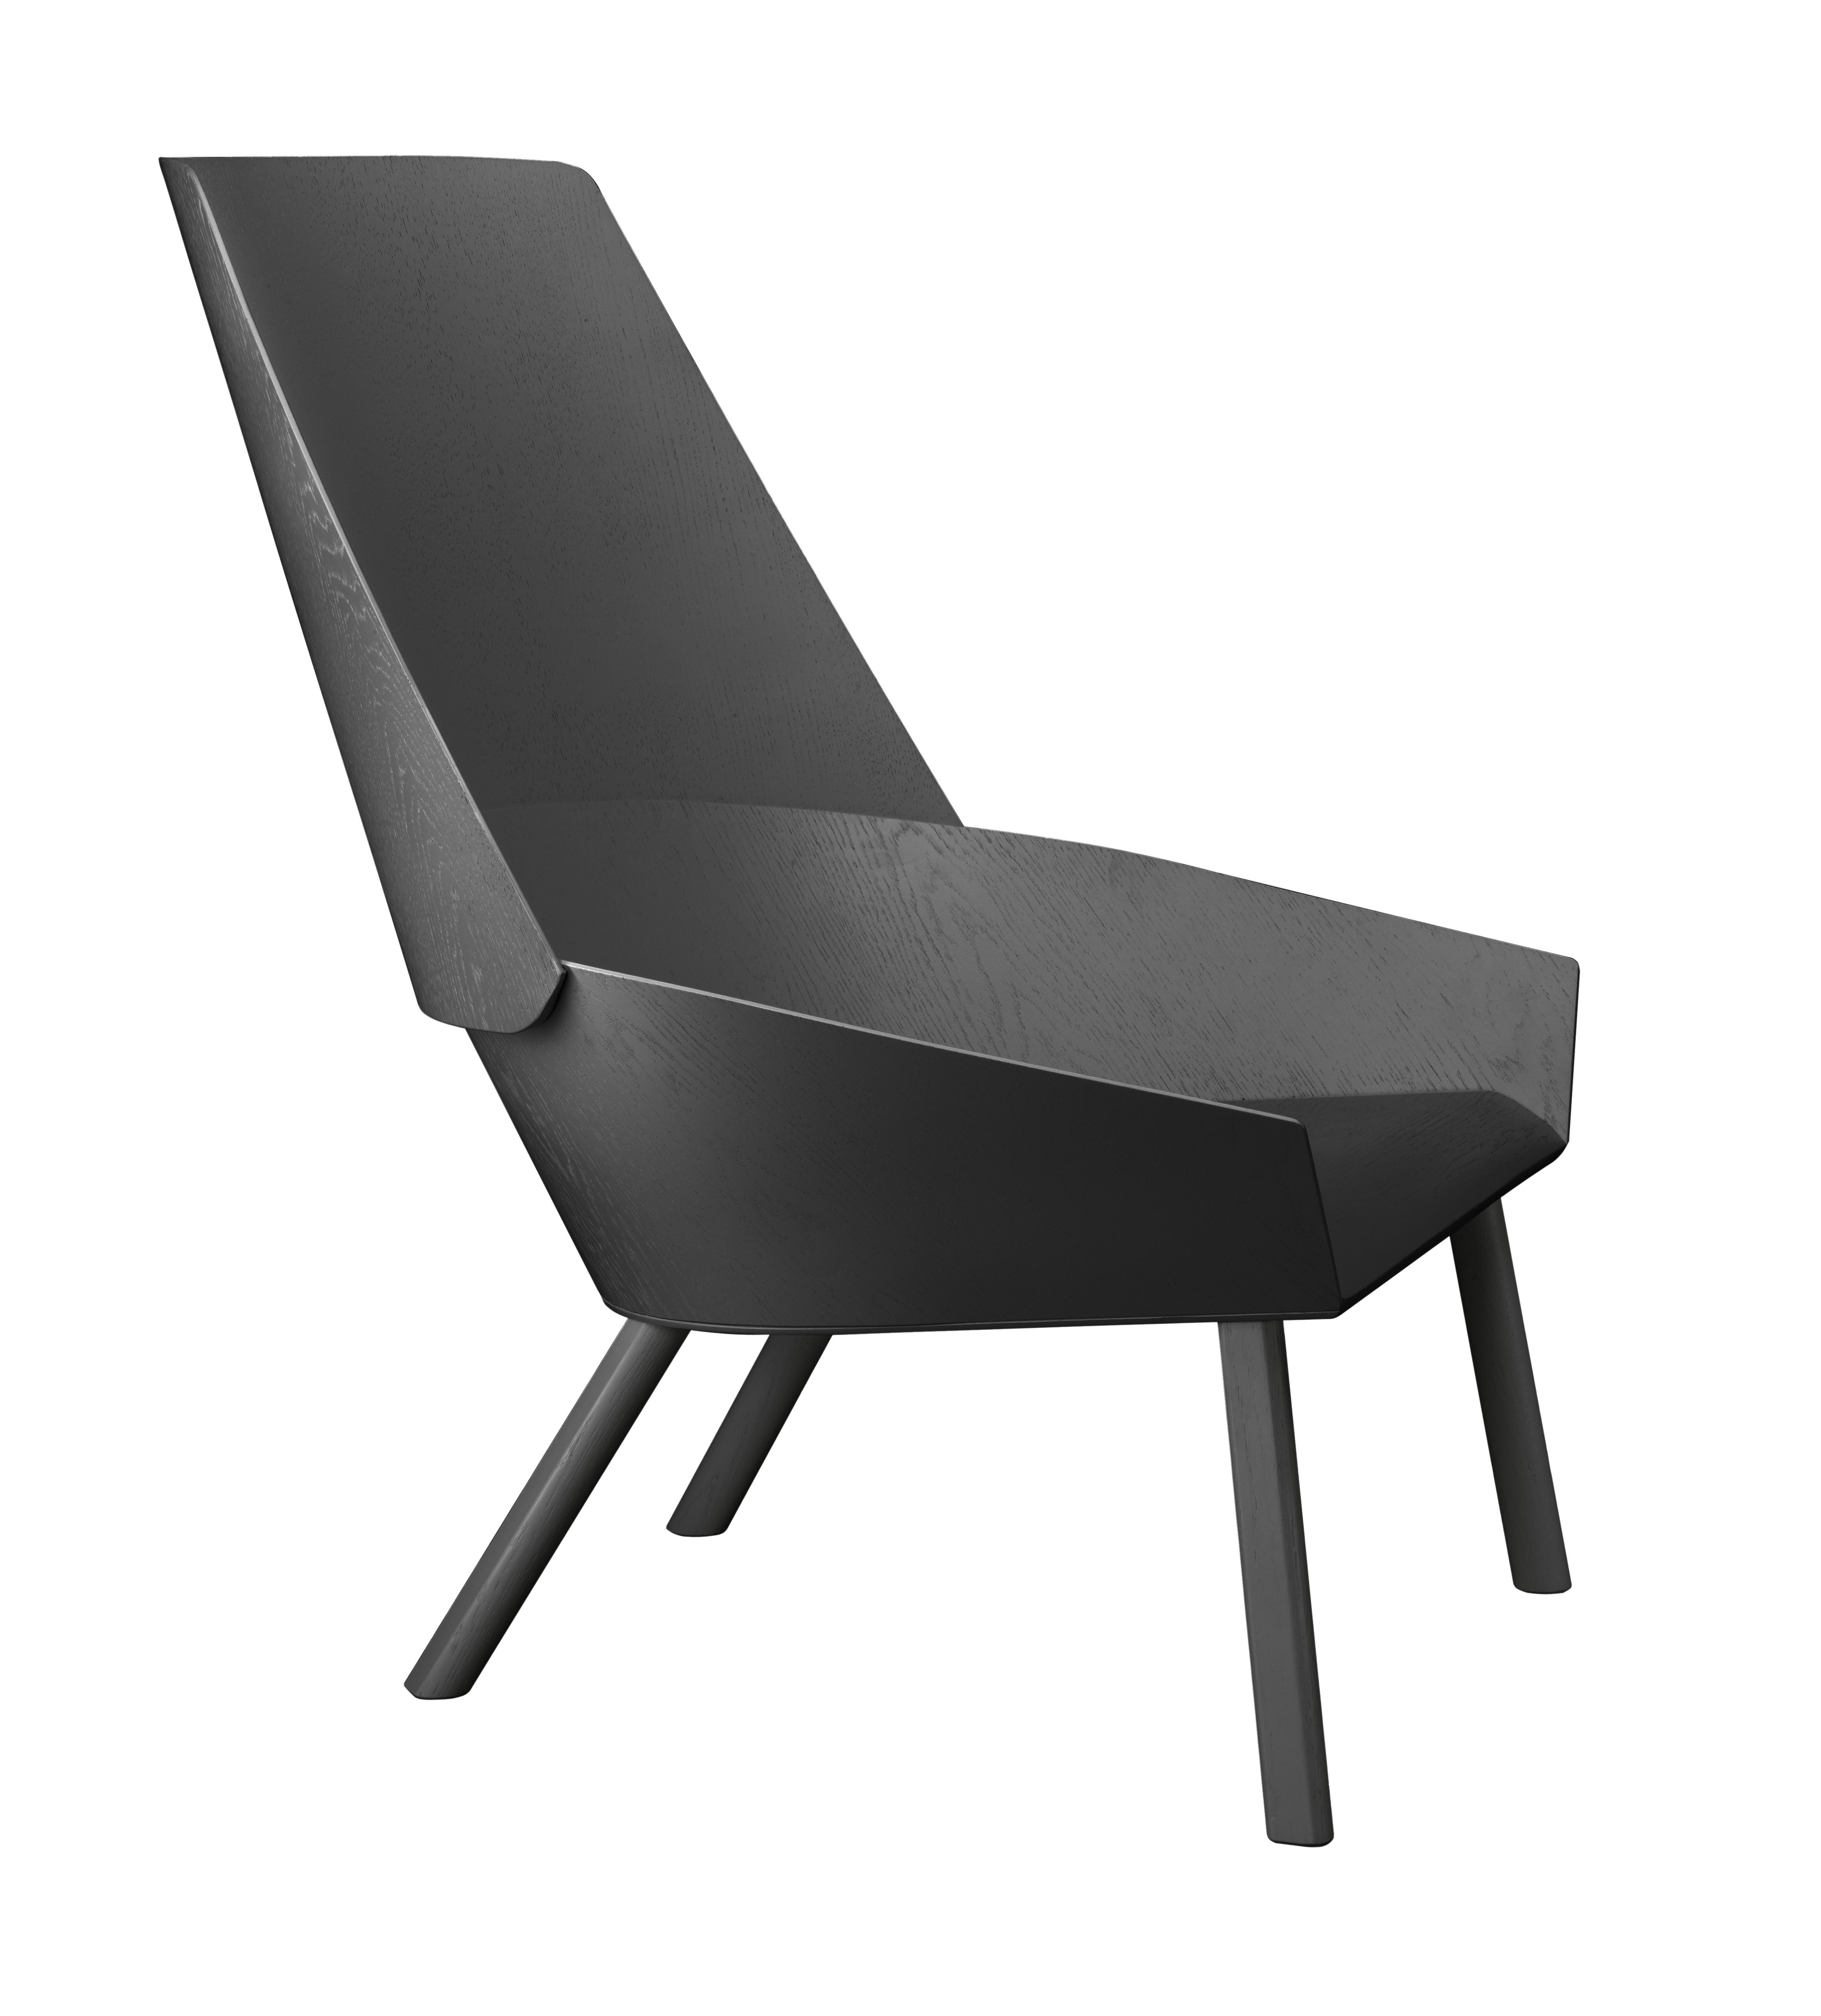 For Sale: Black (Jet Black Lacquer) Customizable e15 Eugene Lounge Chair with Oak Base by Stefan Diez